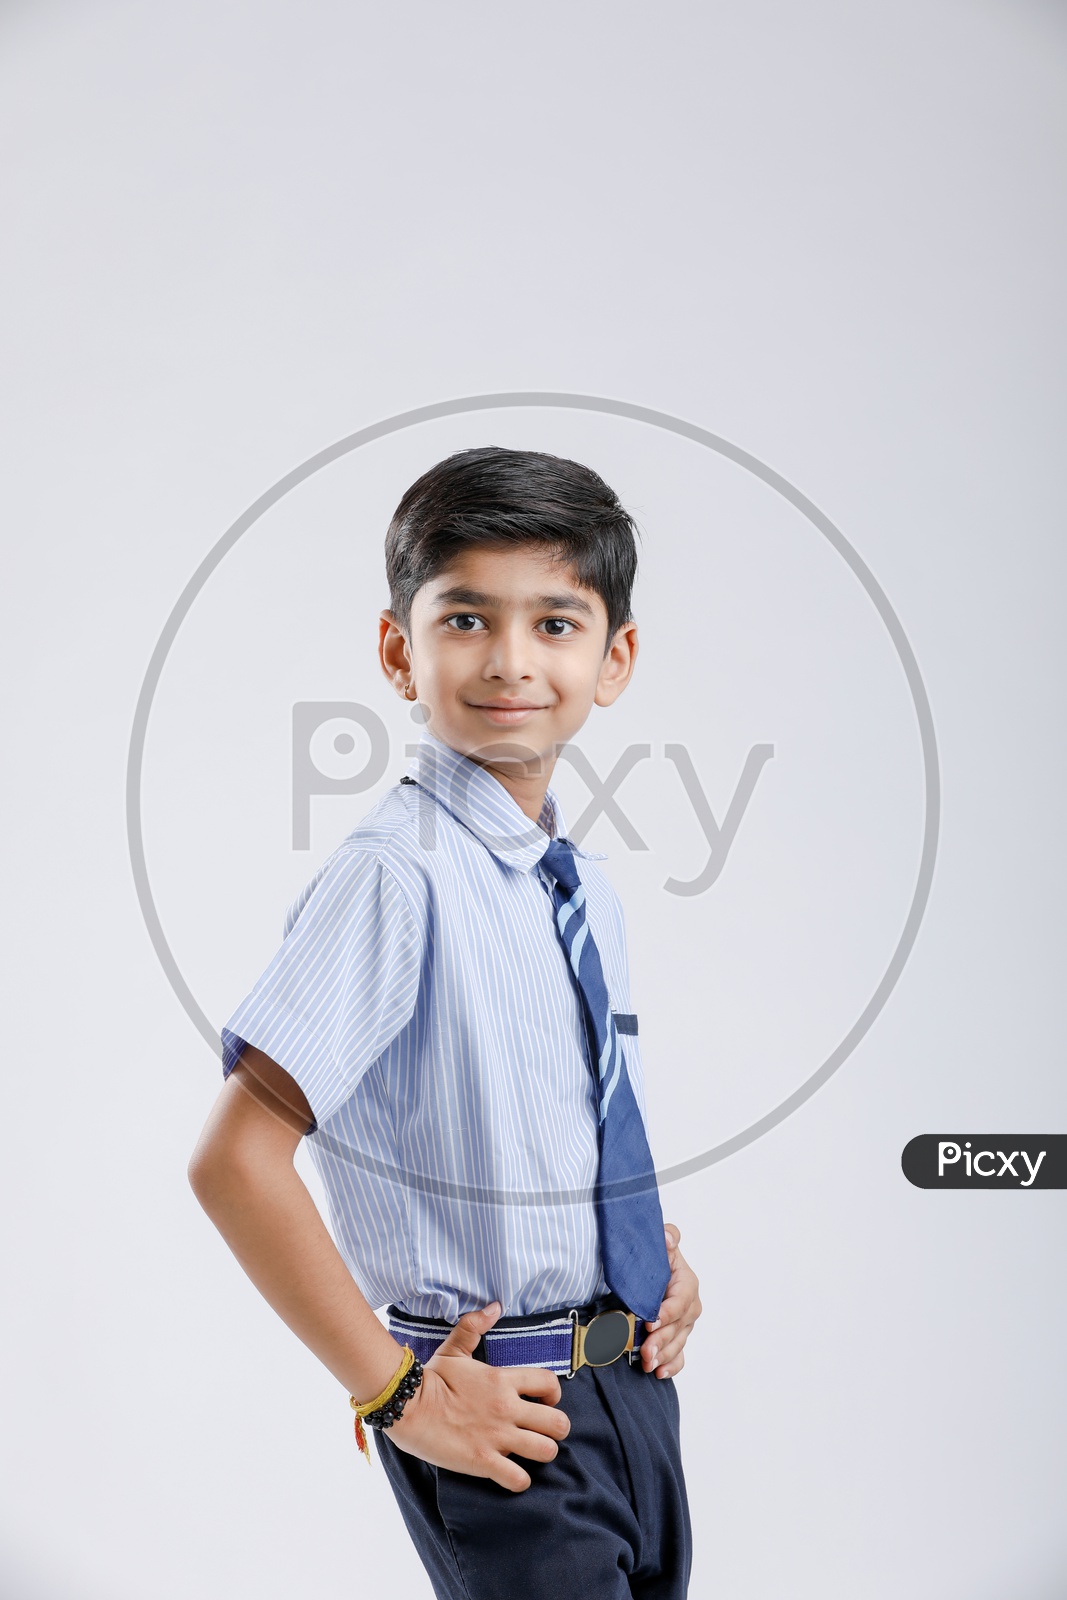 Indian Or Asian Boy Or Kid Or student in School Uniform  And  Posing  Over an Isolated White Background